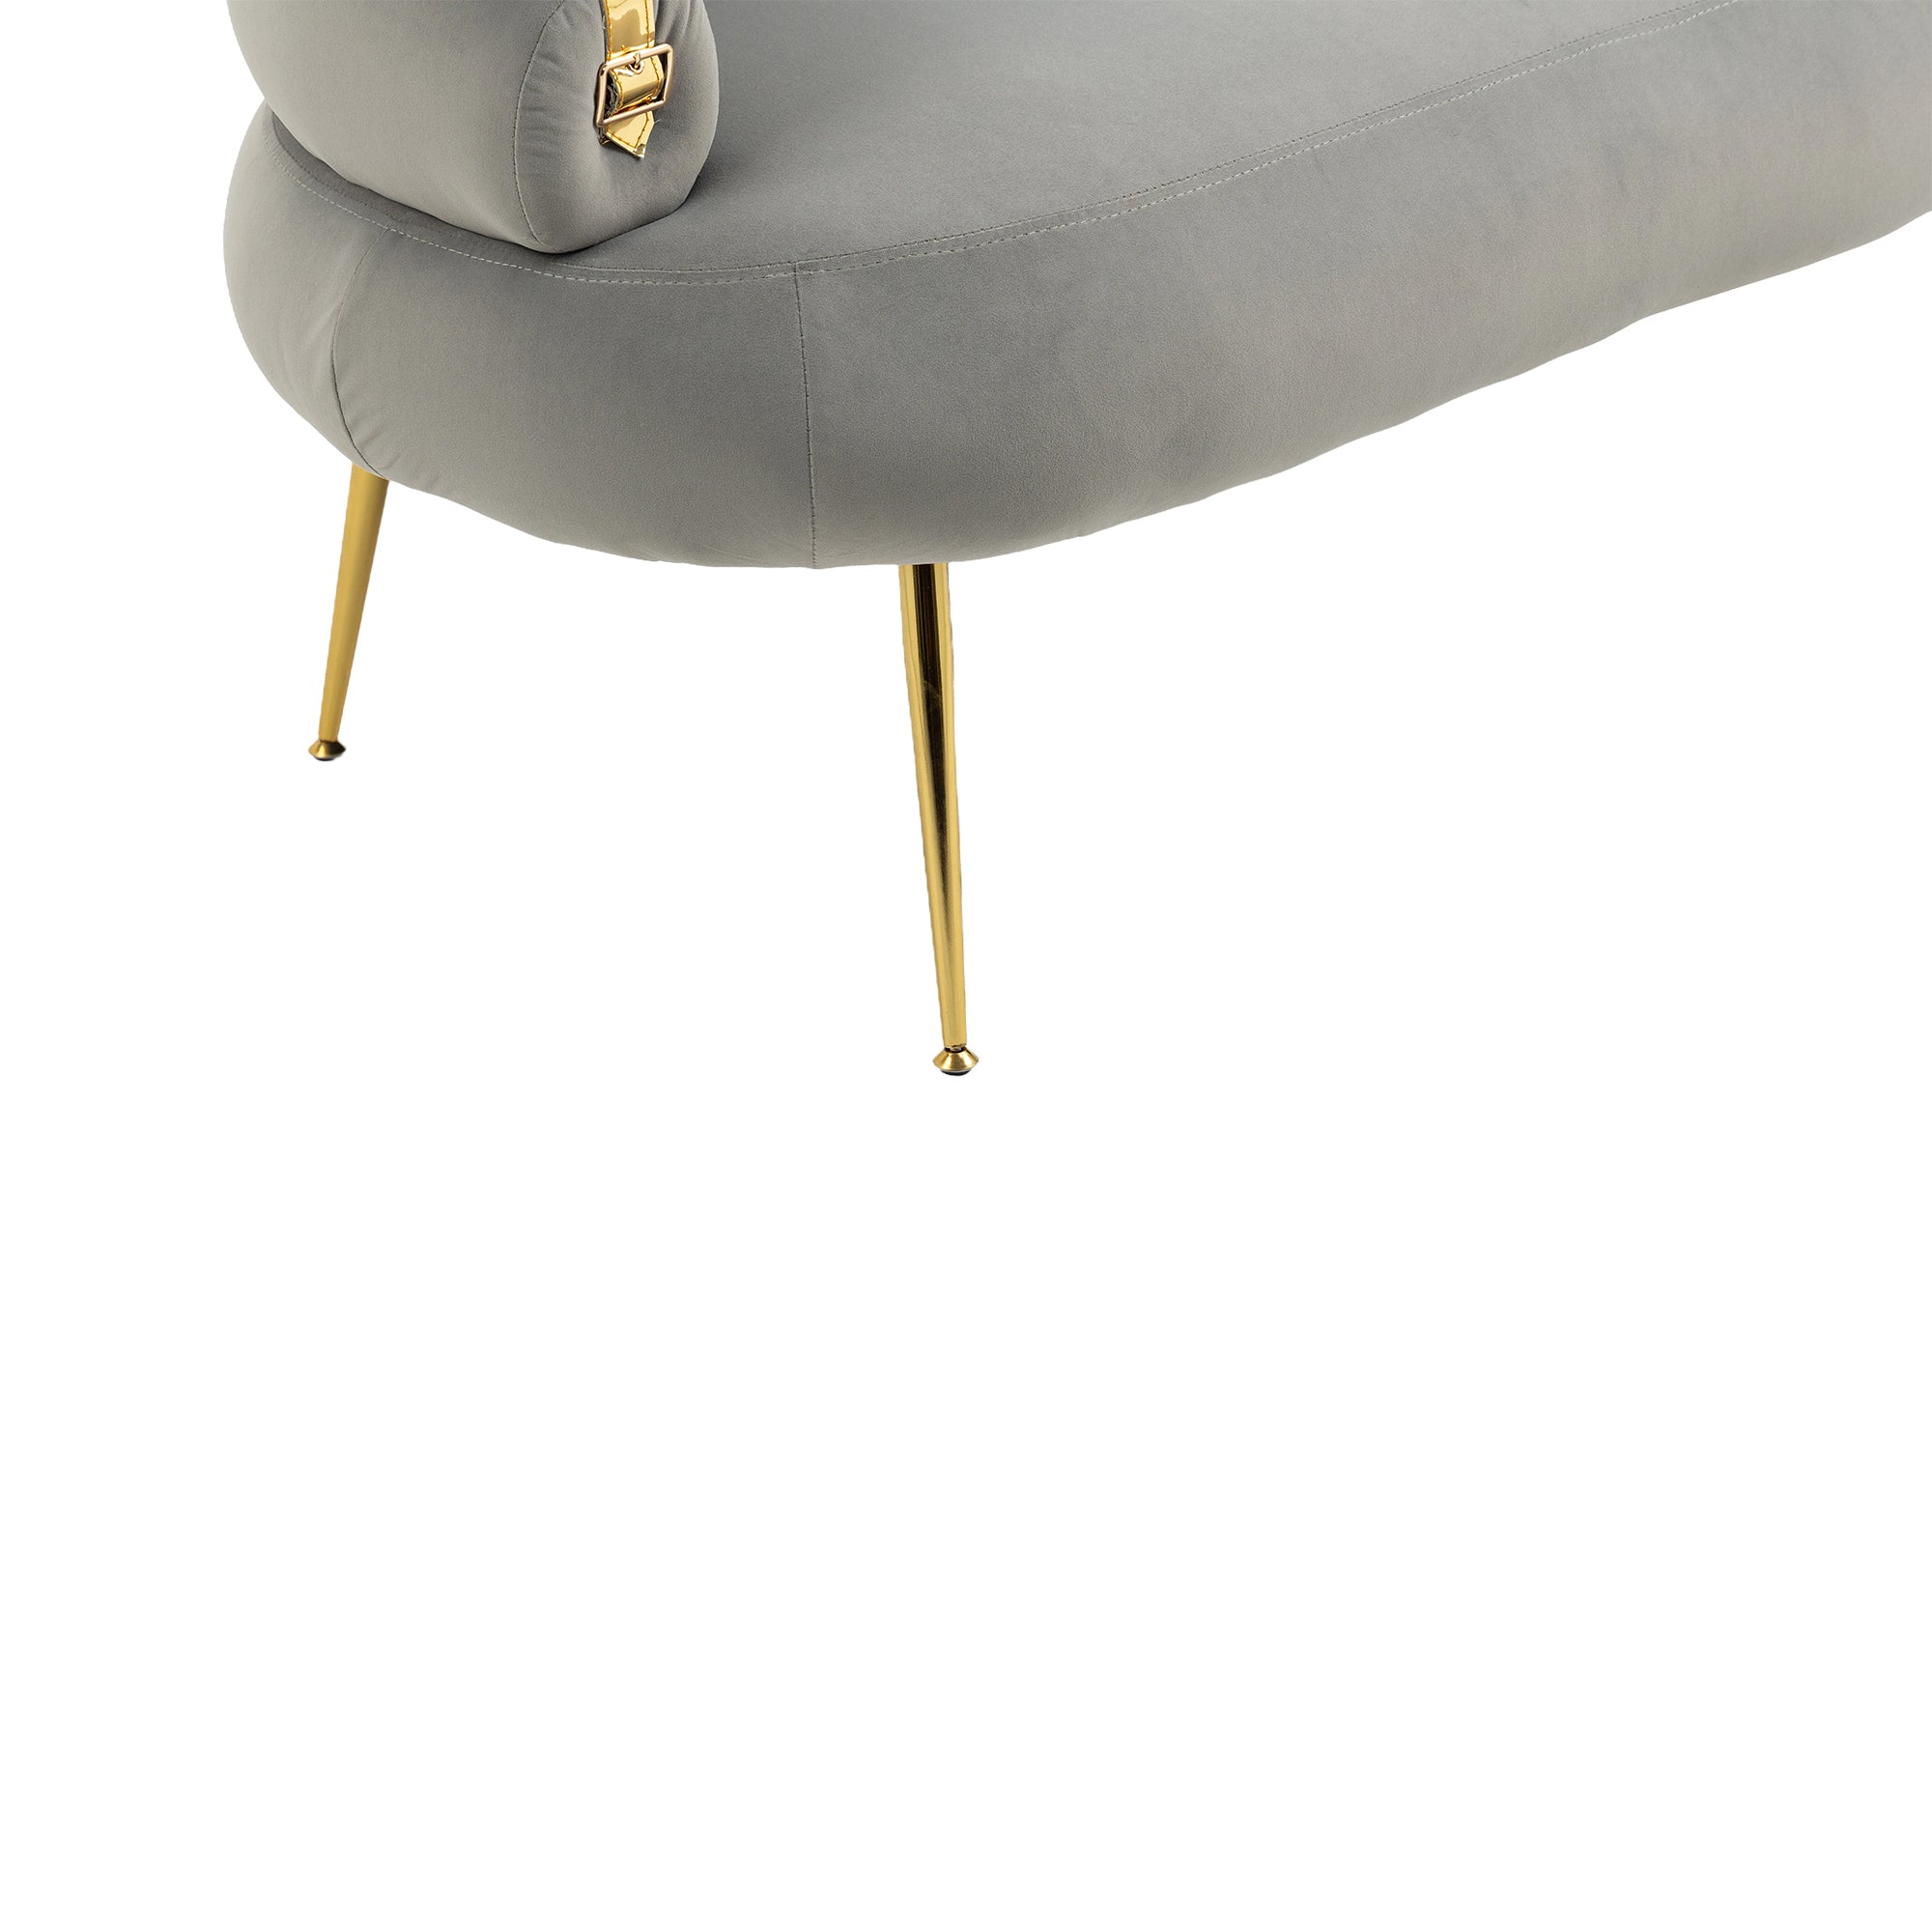 COOLMORE Accent Chair ,leisure chair with Golden feet gray-velvet